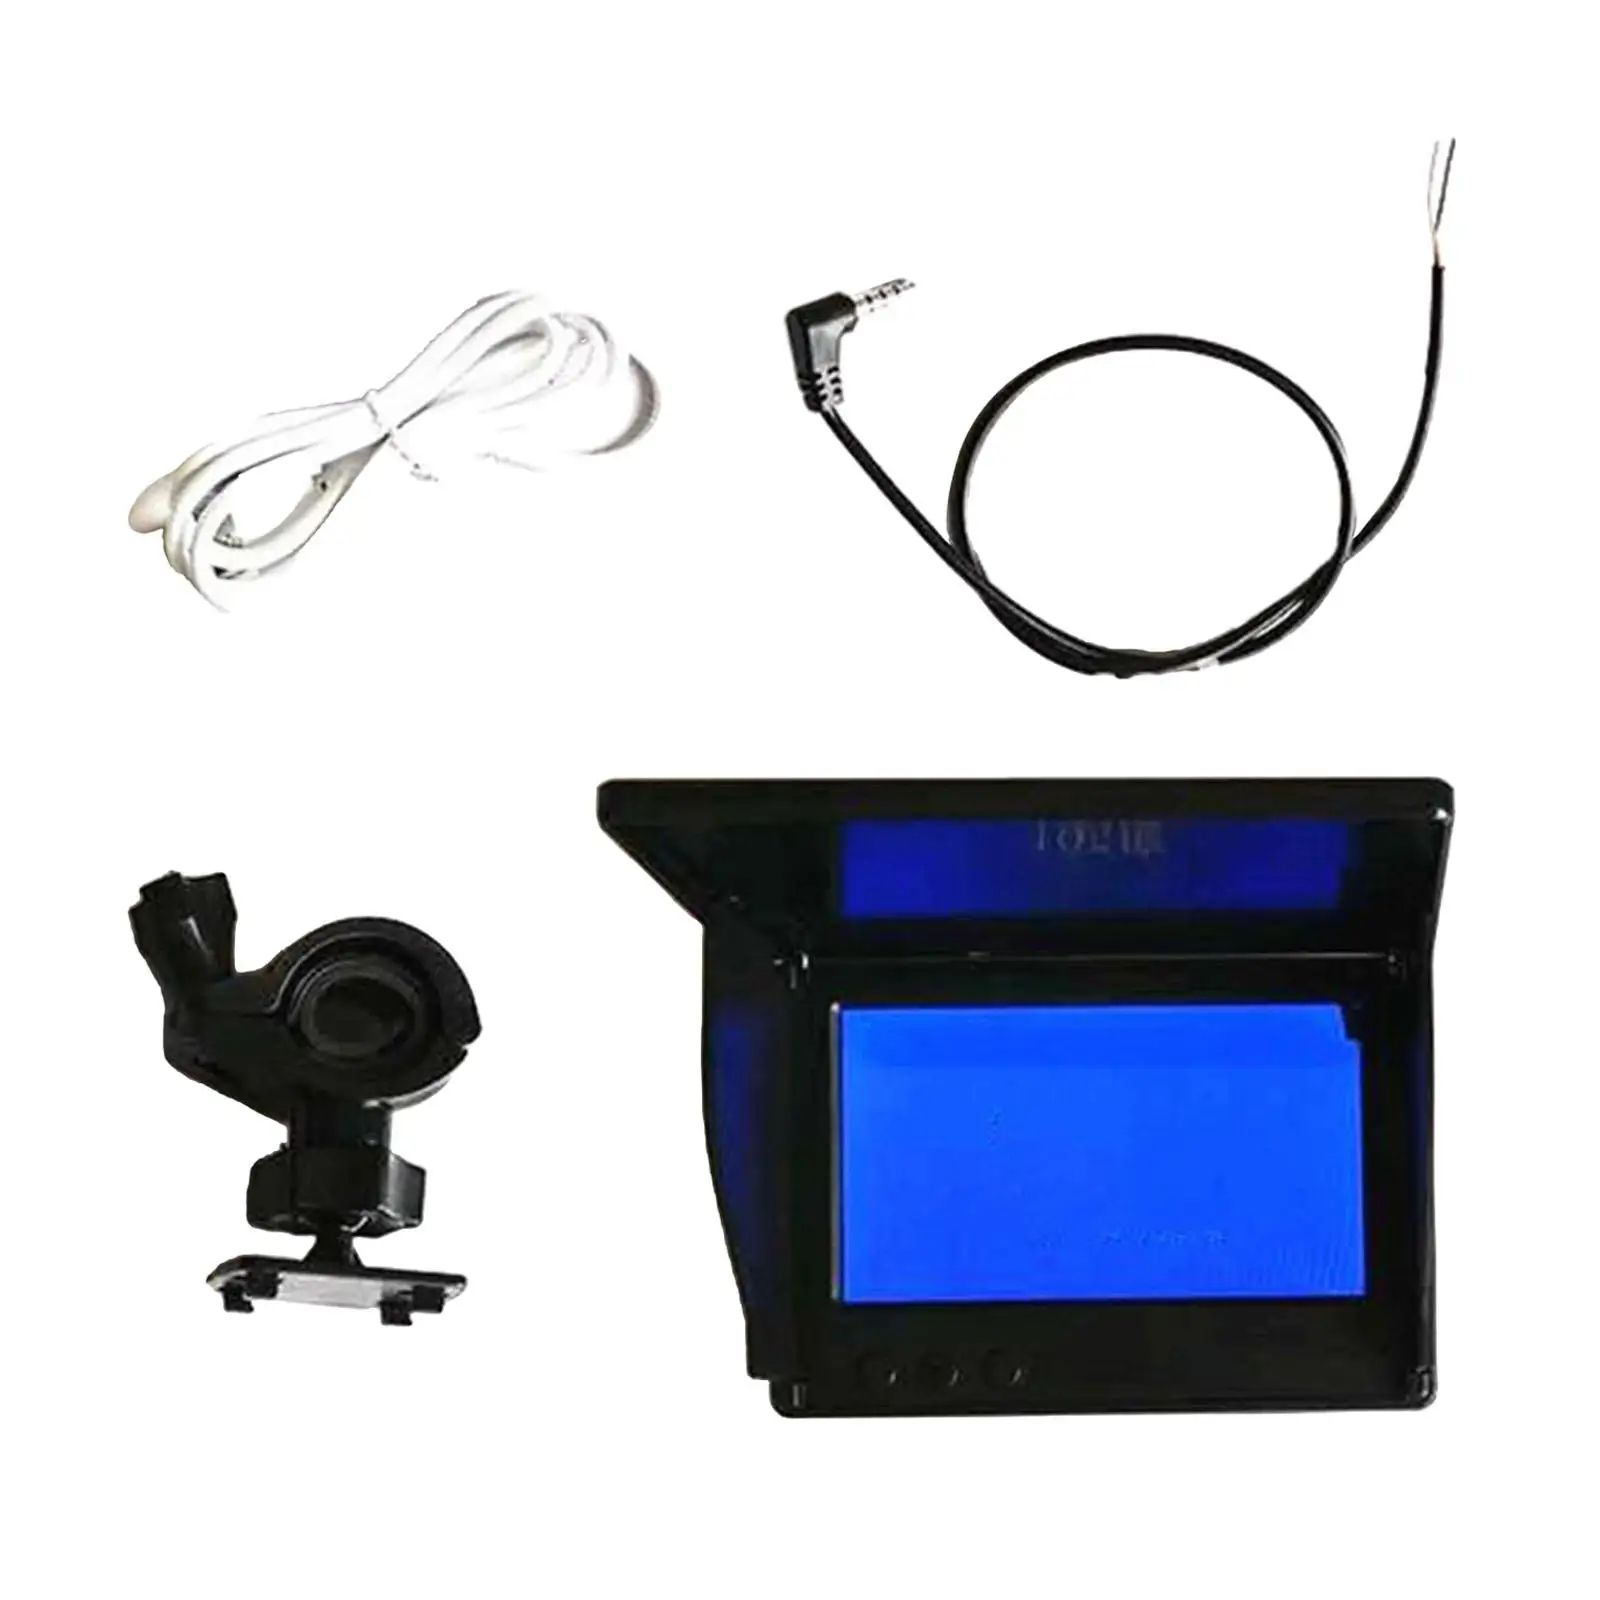 HD Fish Finder Display Screen with Folding Sun Cover for Fishing Accessories